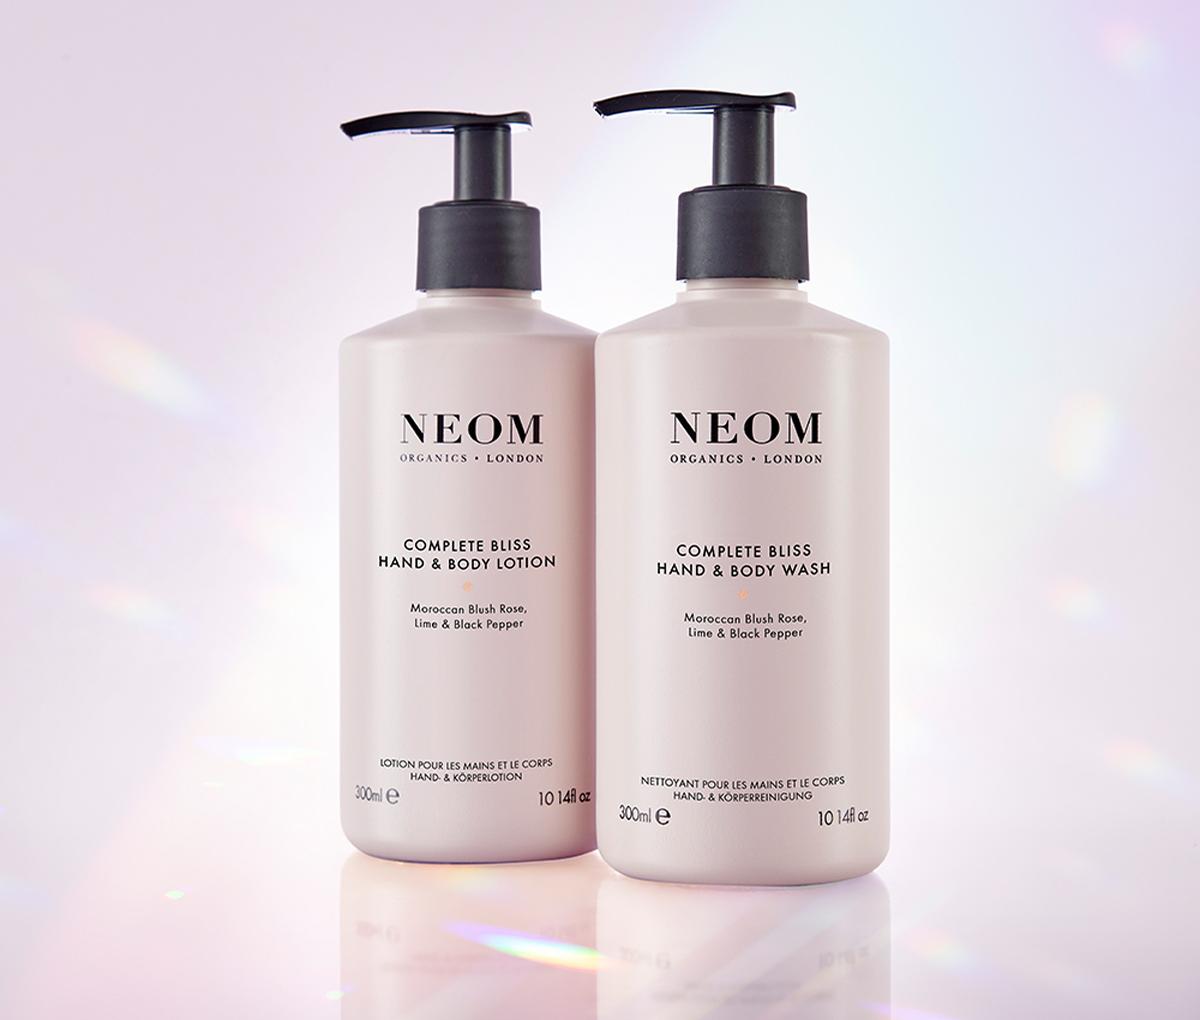 The line features a hand and body wash or lotion, available in two scents / Neom Organics